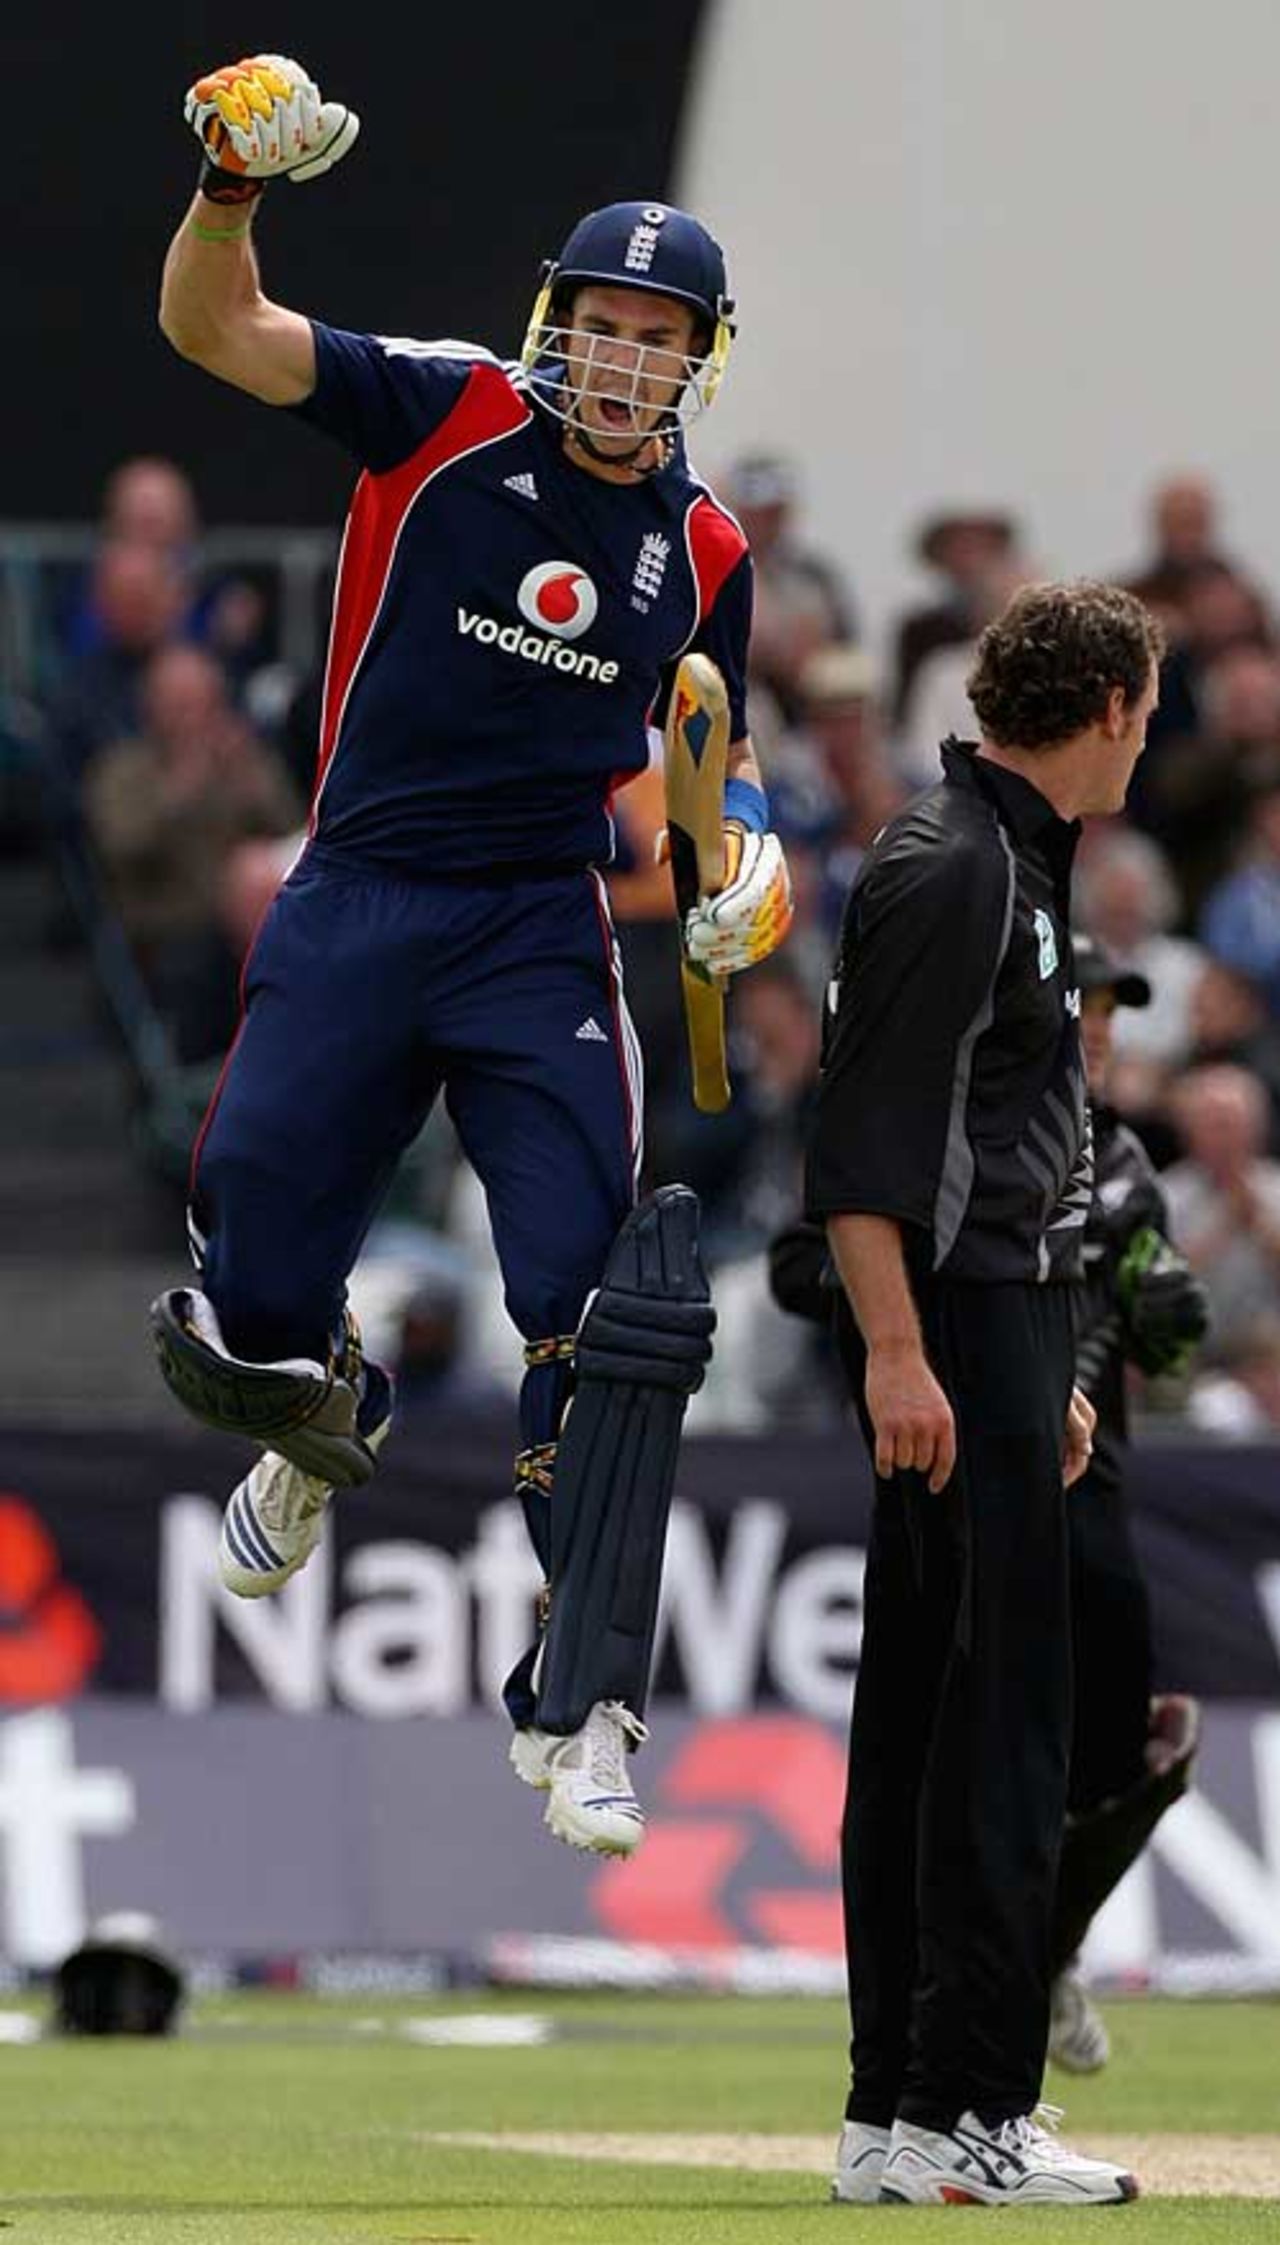 Kevin Pietersen celebrates reaching his first ODI century on home soil, England v New Zealand, 1st ODI, Chester-le-Street, June 15, 2008